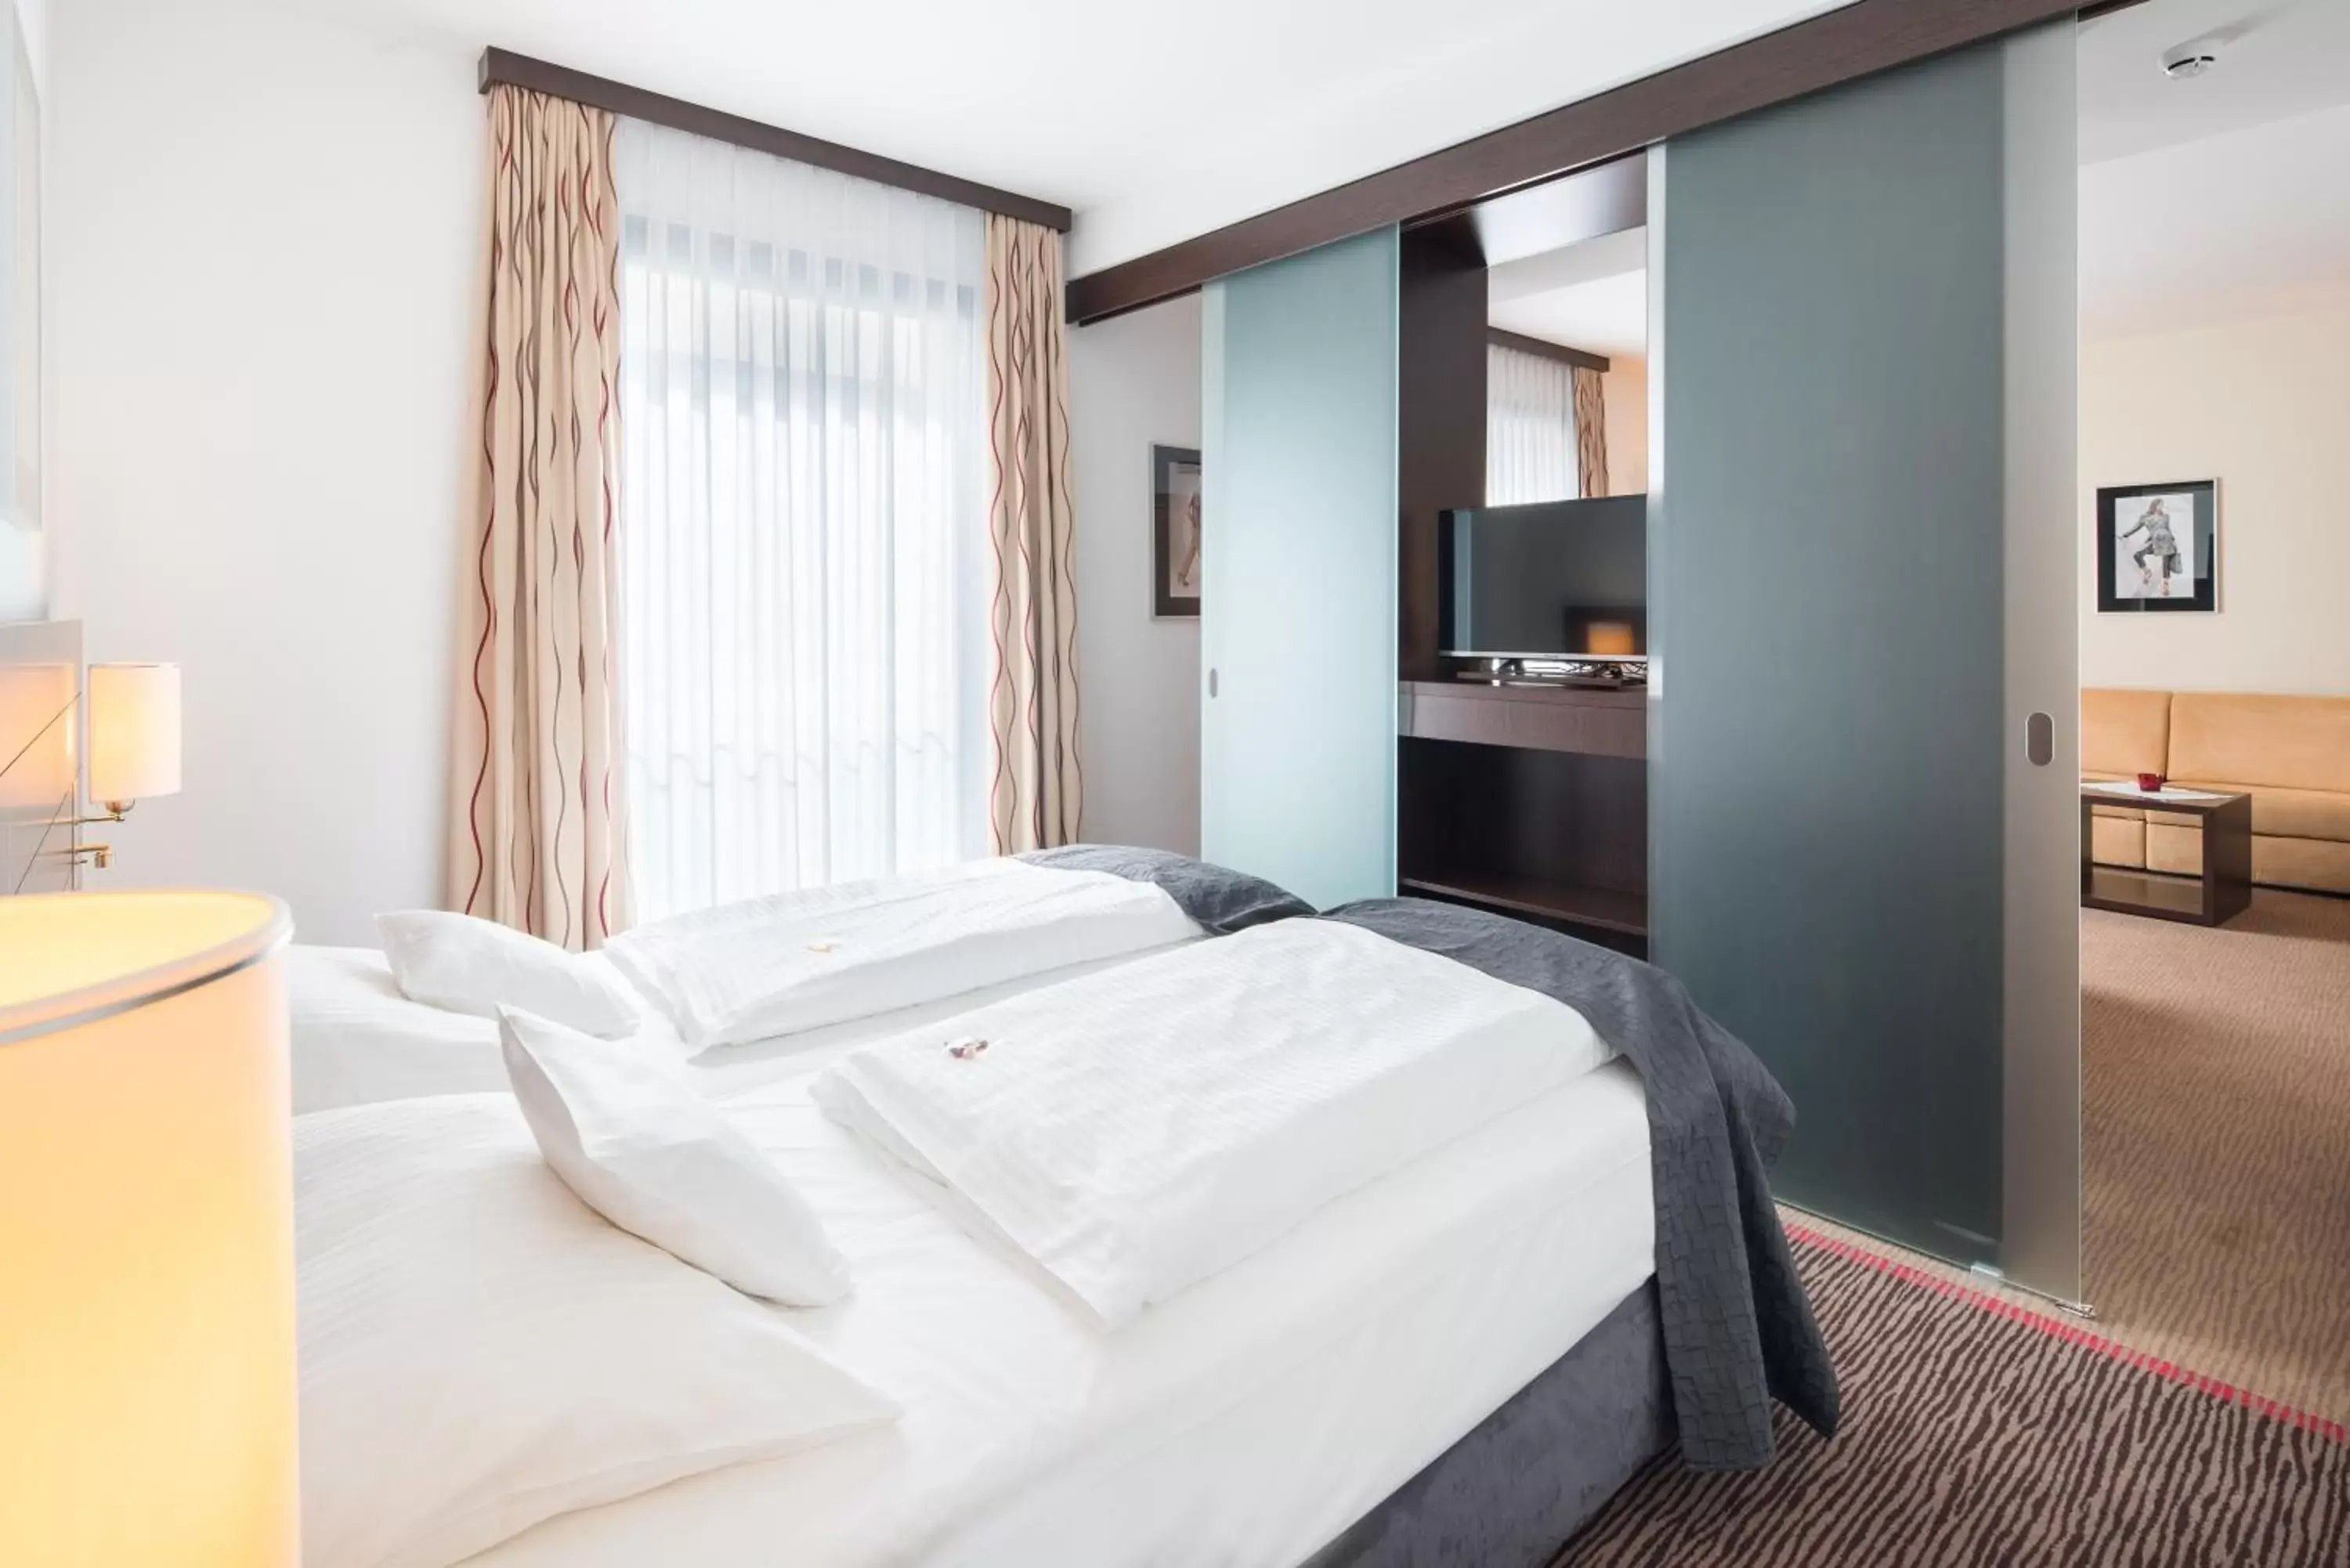 Property building, Bed in Best Western Plus Hotel Ostertor